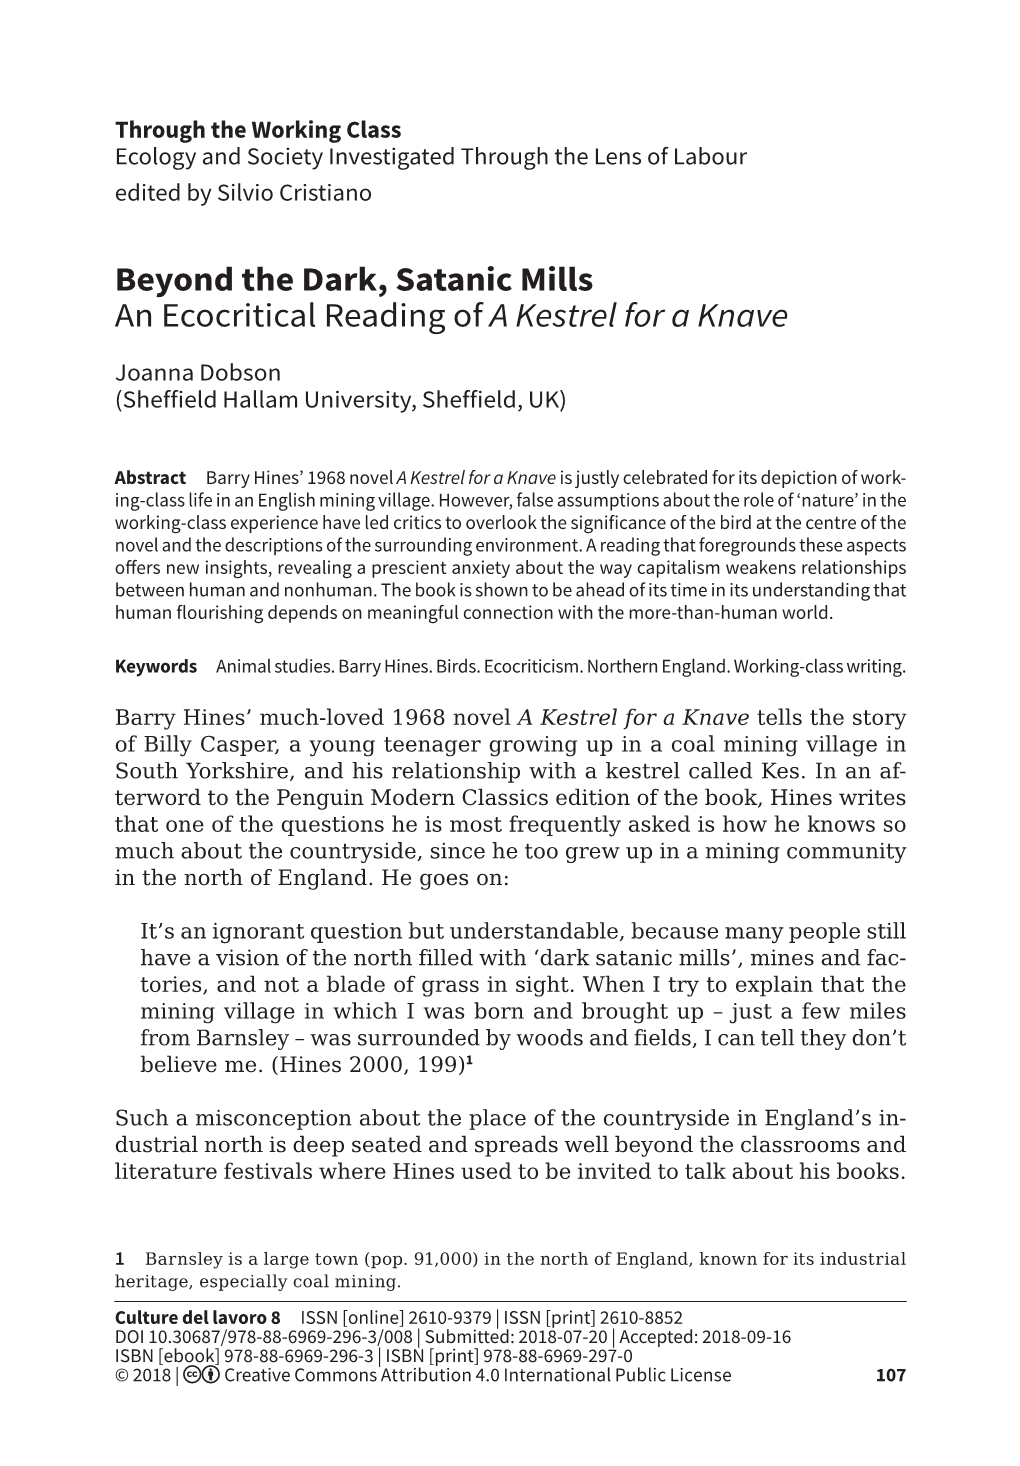 Beyond the Dark, Satanic Mills an Ecocritical Reading of a Kestrel for a Knave